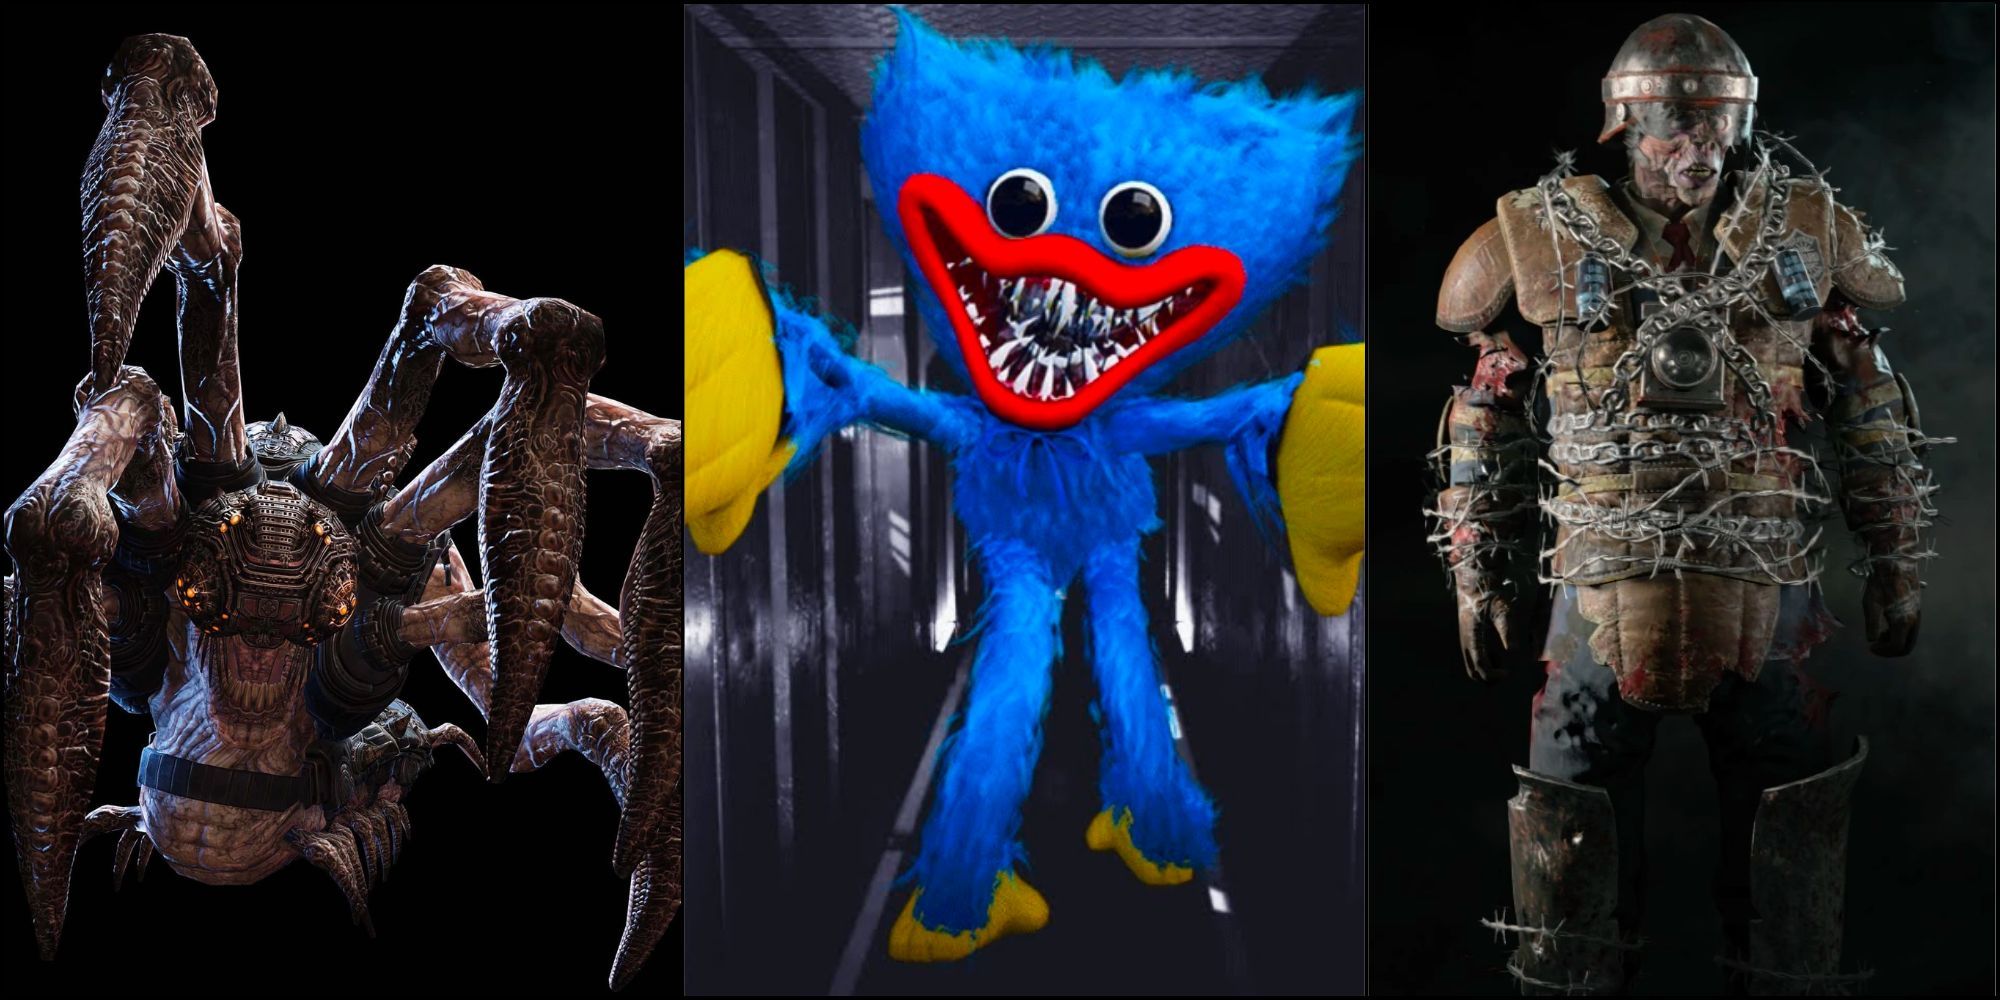 Corpser, Huggy Wuggy, Brutus in Split Image Collage